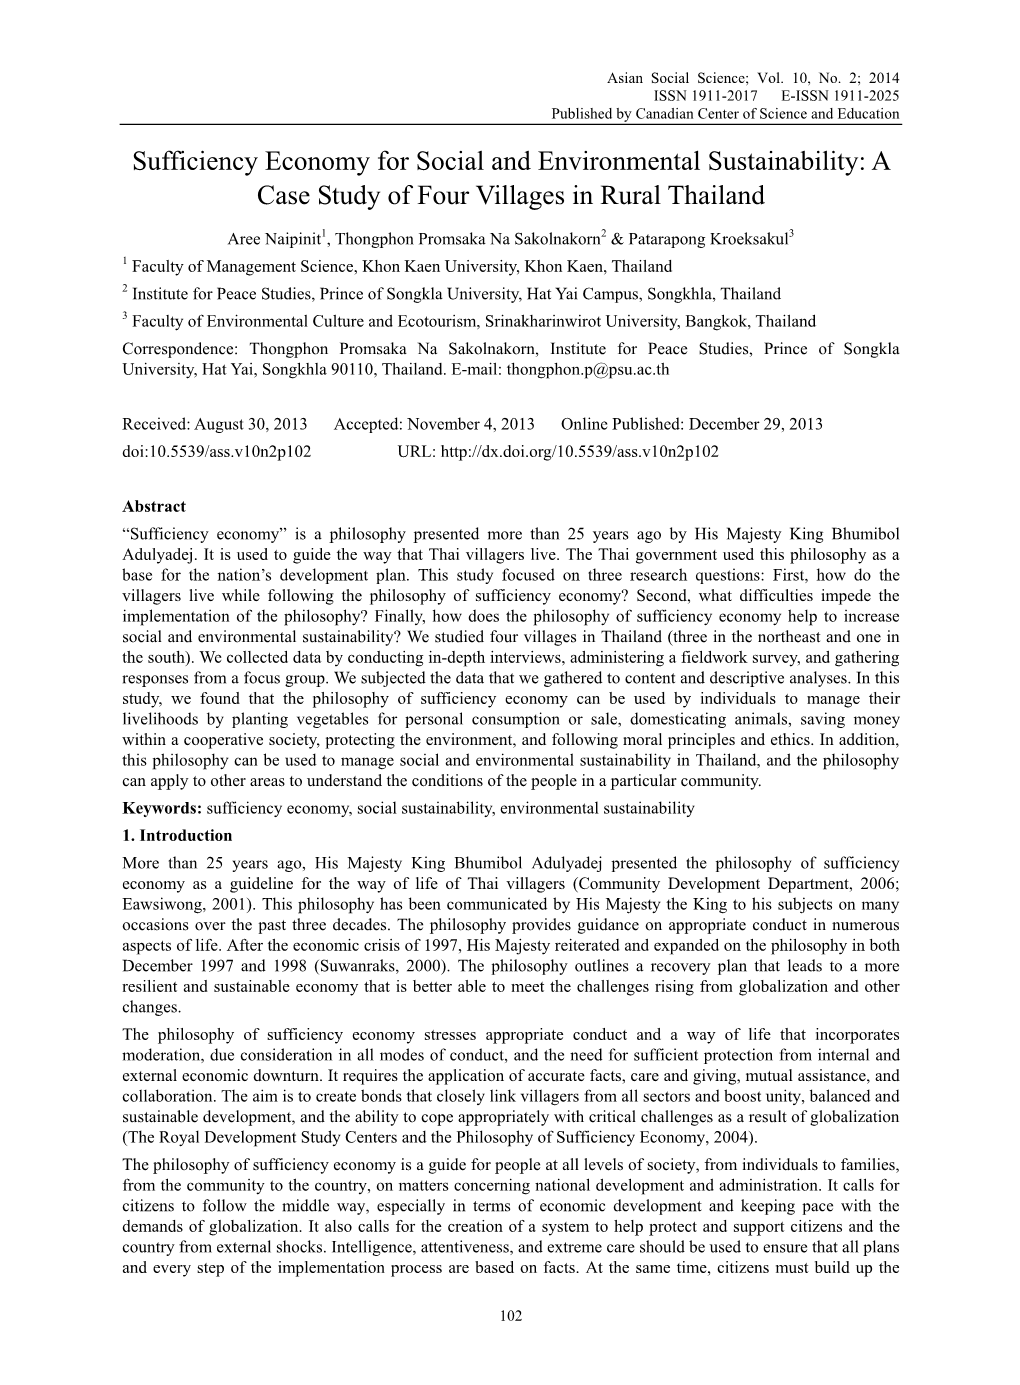 Sufficiency Economy for Social and Environmental Sustainability: a Case Study of Four Villages in Rural Thailand